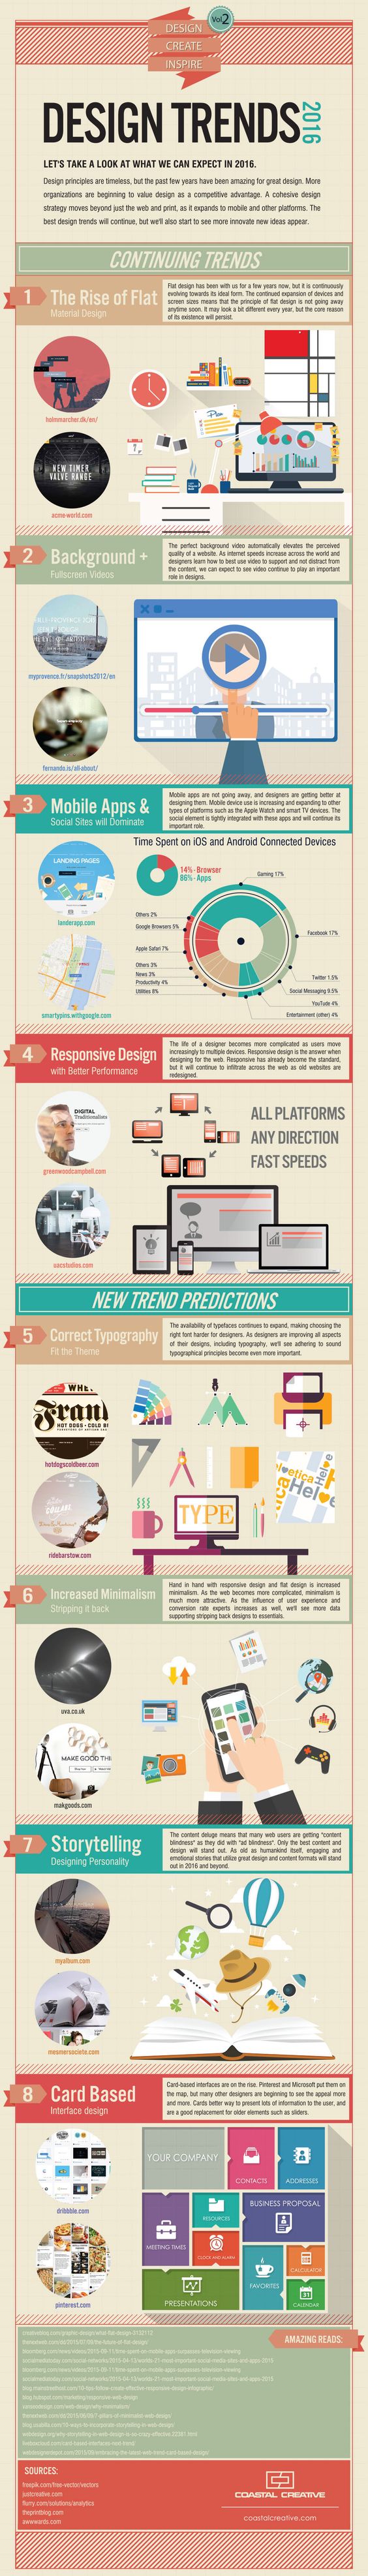 [INFOGRAPHIC] 8 Web Design Trends That Are Bound to Be Huge in 2016—Flat; Backgrounds; Mobile; Responsive; Type; Minimalism; Storytelling; Cards; Details